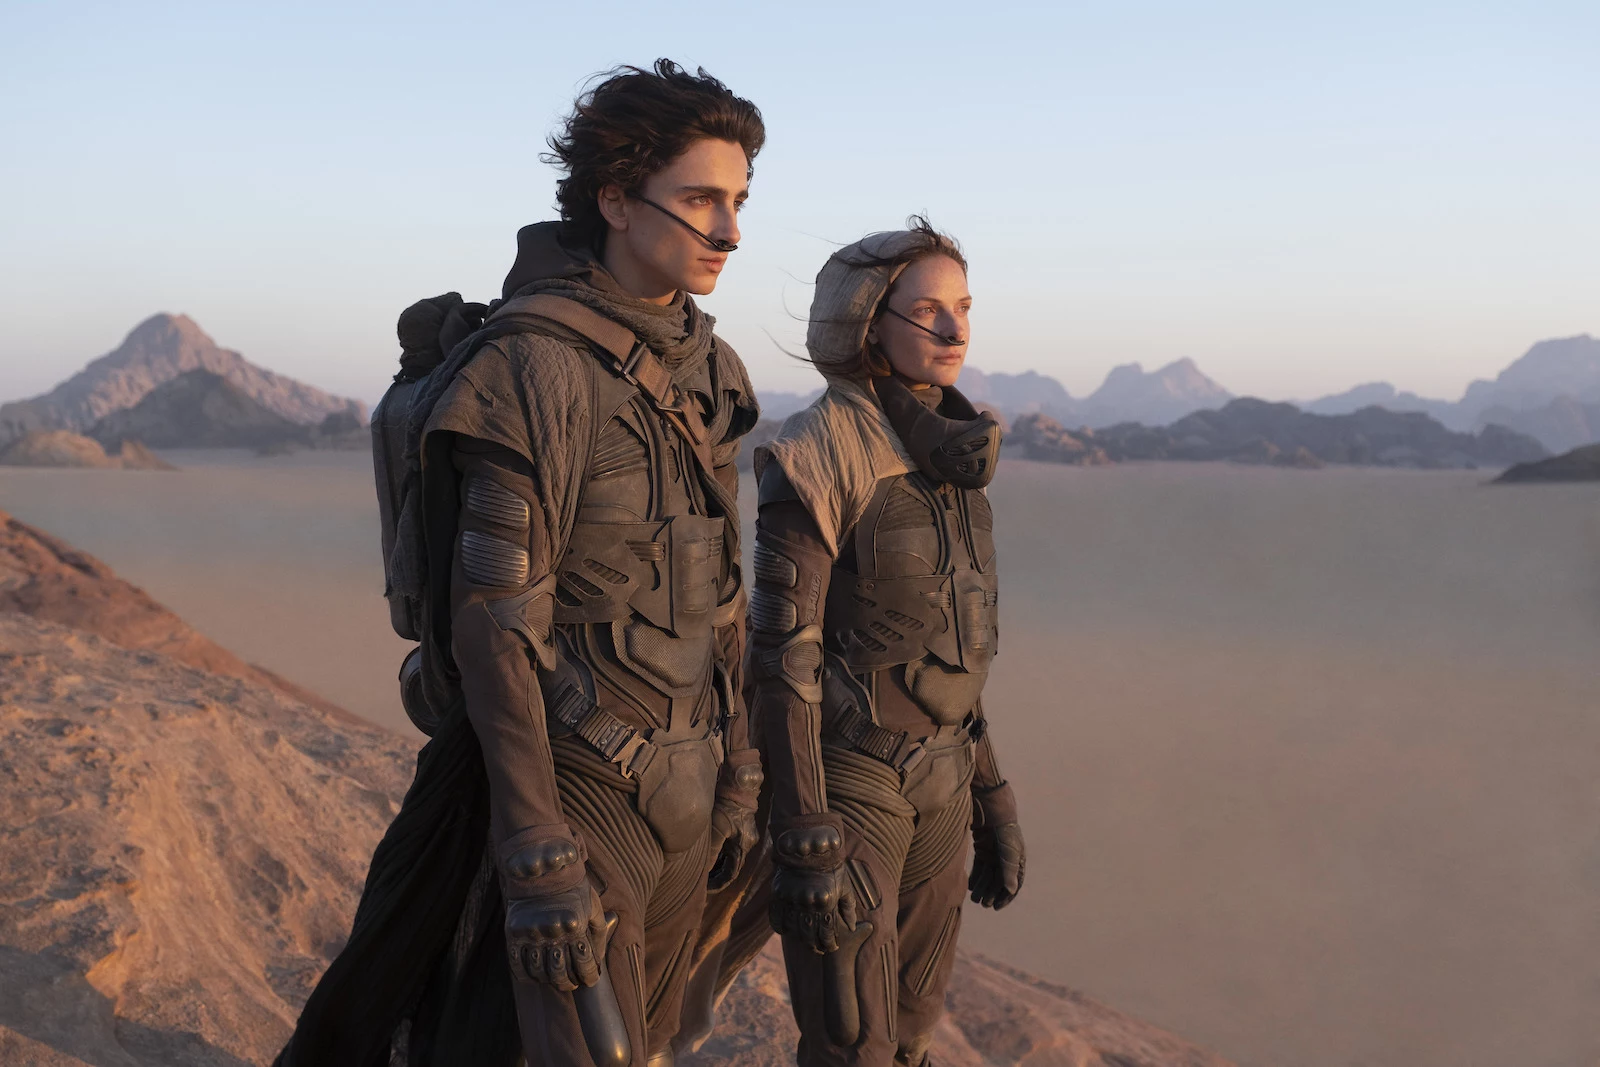 Would You Like to Own the Digital Movie Dune? pic